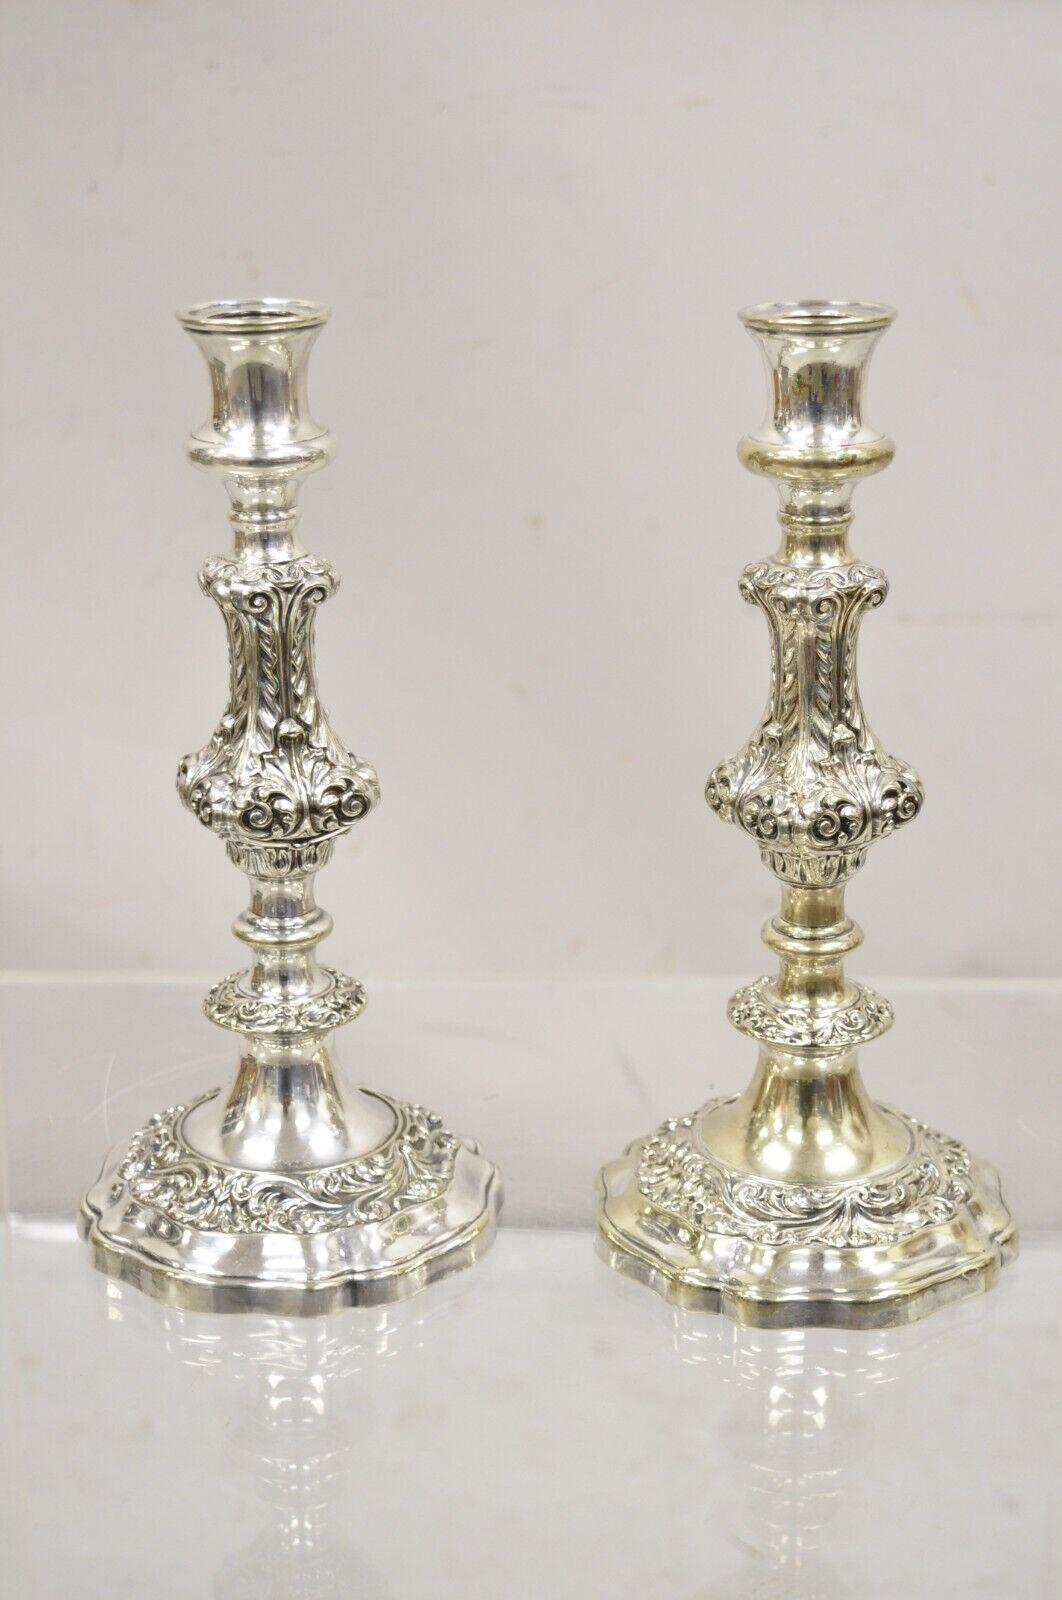 Vintage Gorham Baroque Repousse Silver Plated Single Candle Candlesticks a Pair For Sale 7